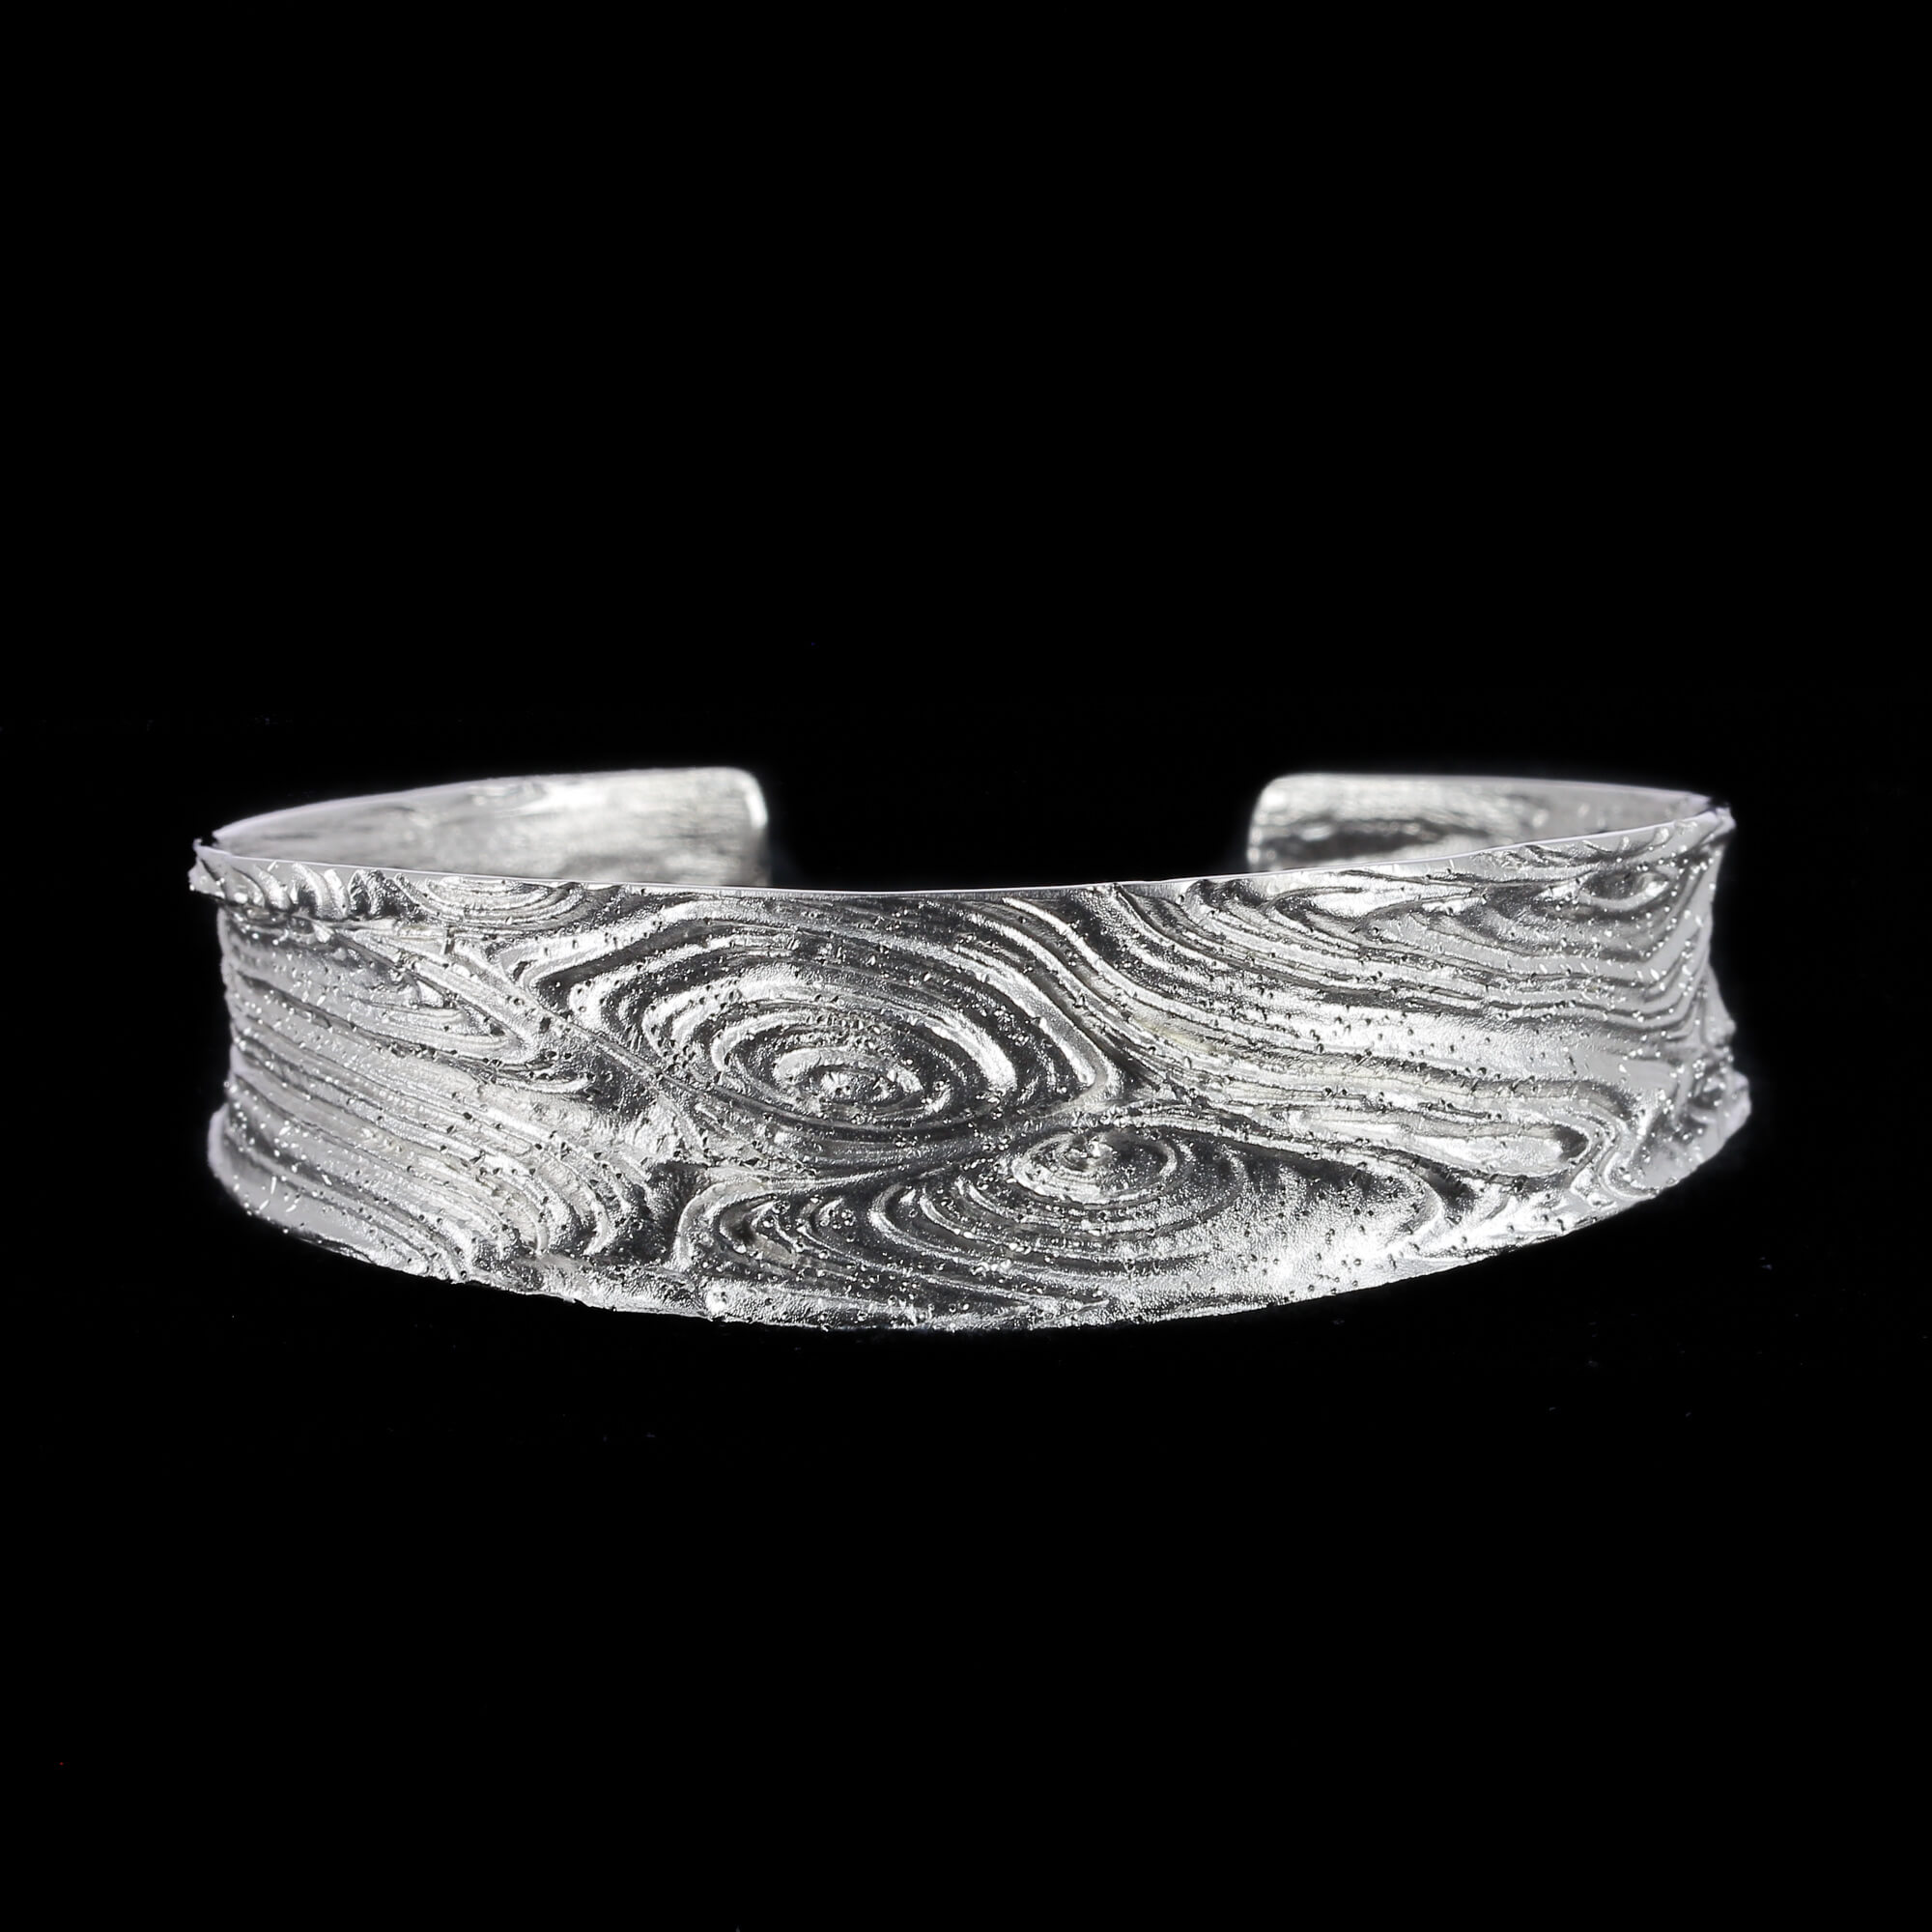 Silver and narrow processed slave bracelet